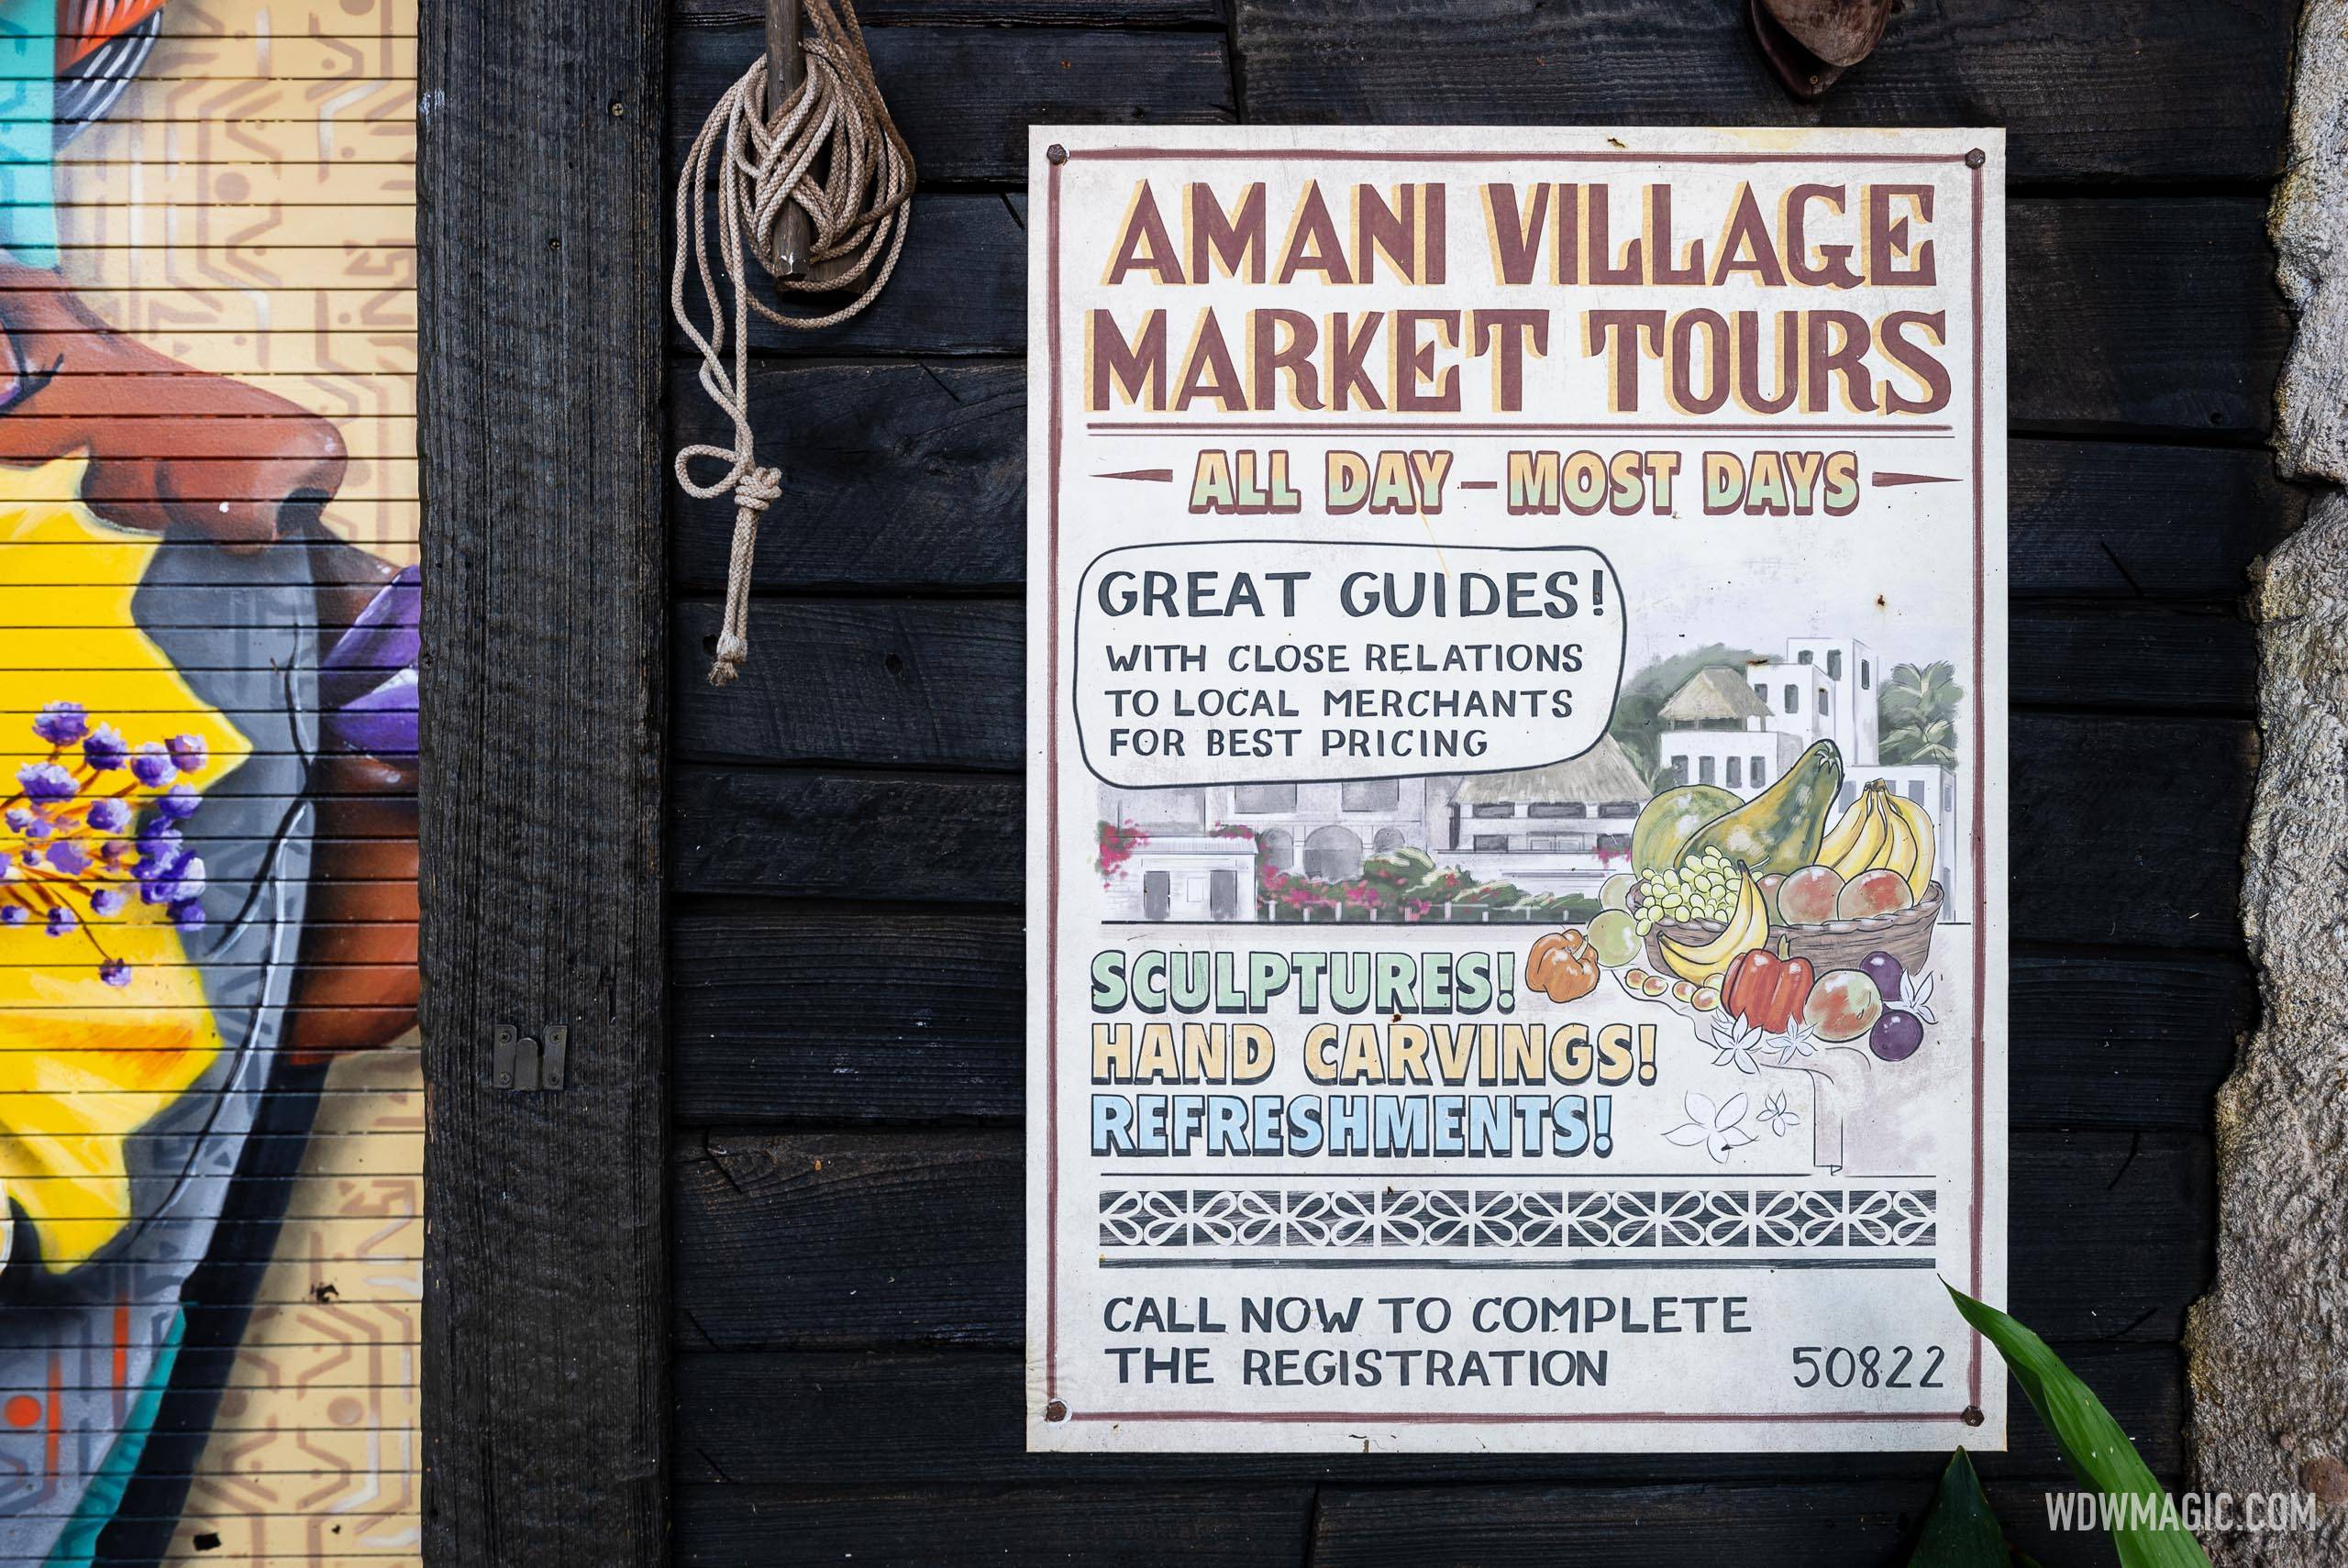 Amani Village Traders overview